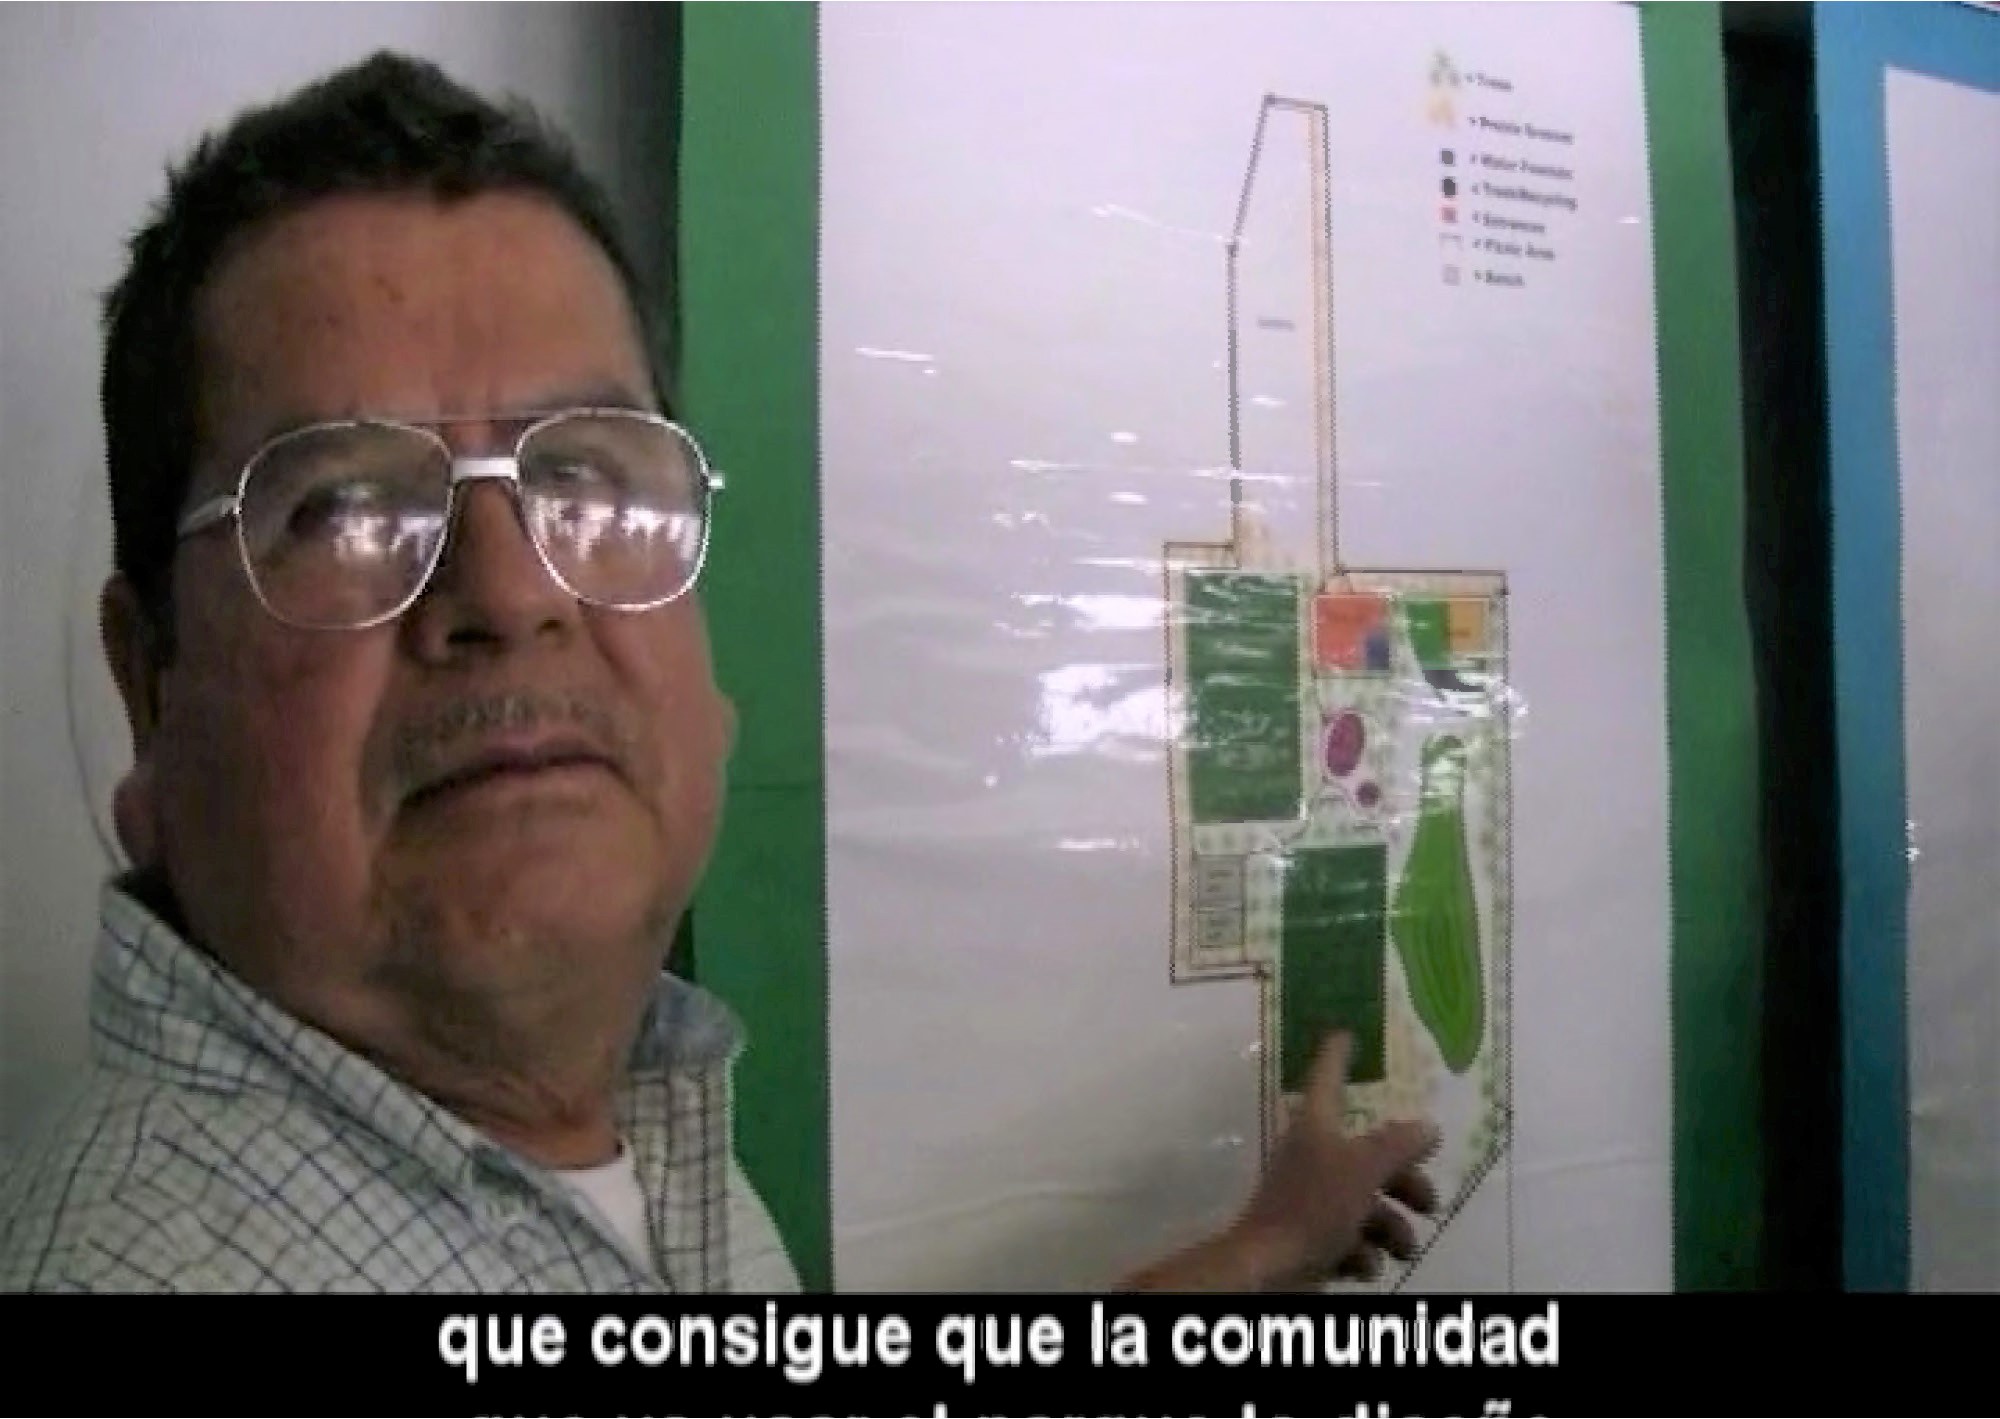 Figure 4. Community member presenting community-based designs for the CELOTEX site. Screenshot from Celotex documentary released by LVEJO